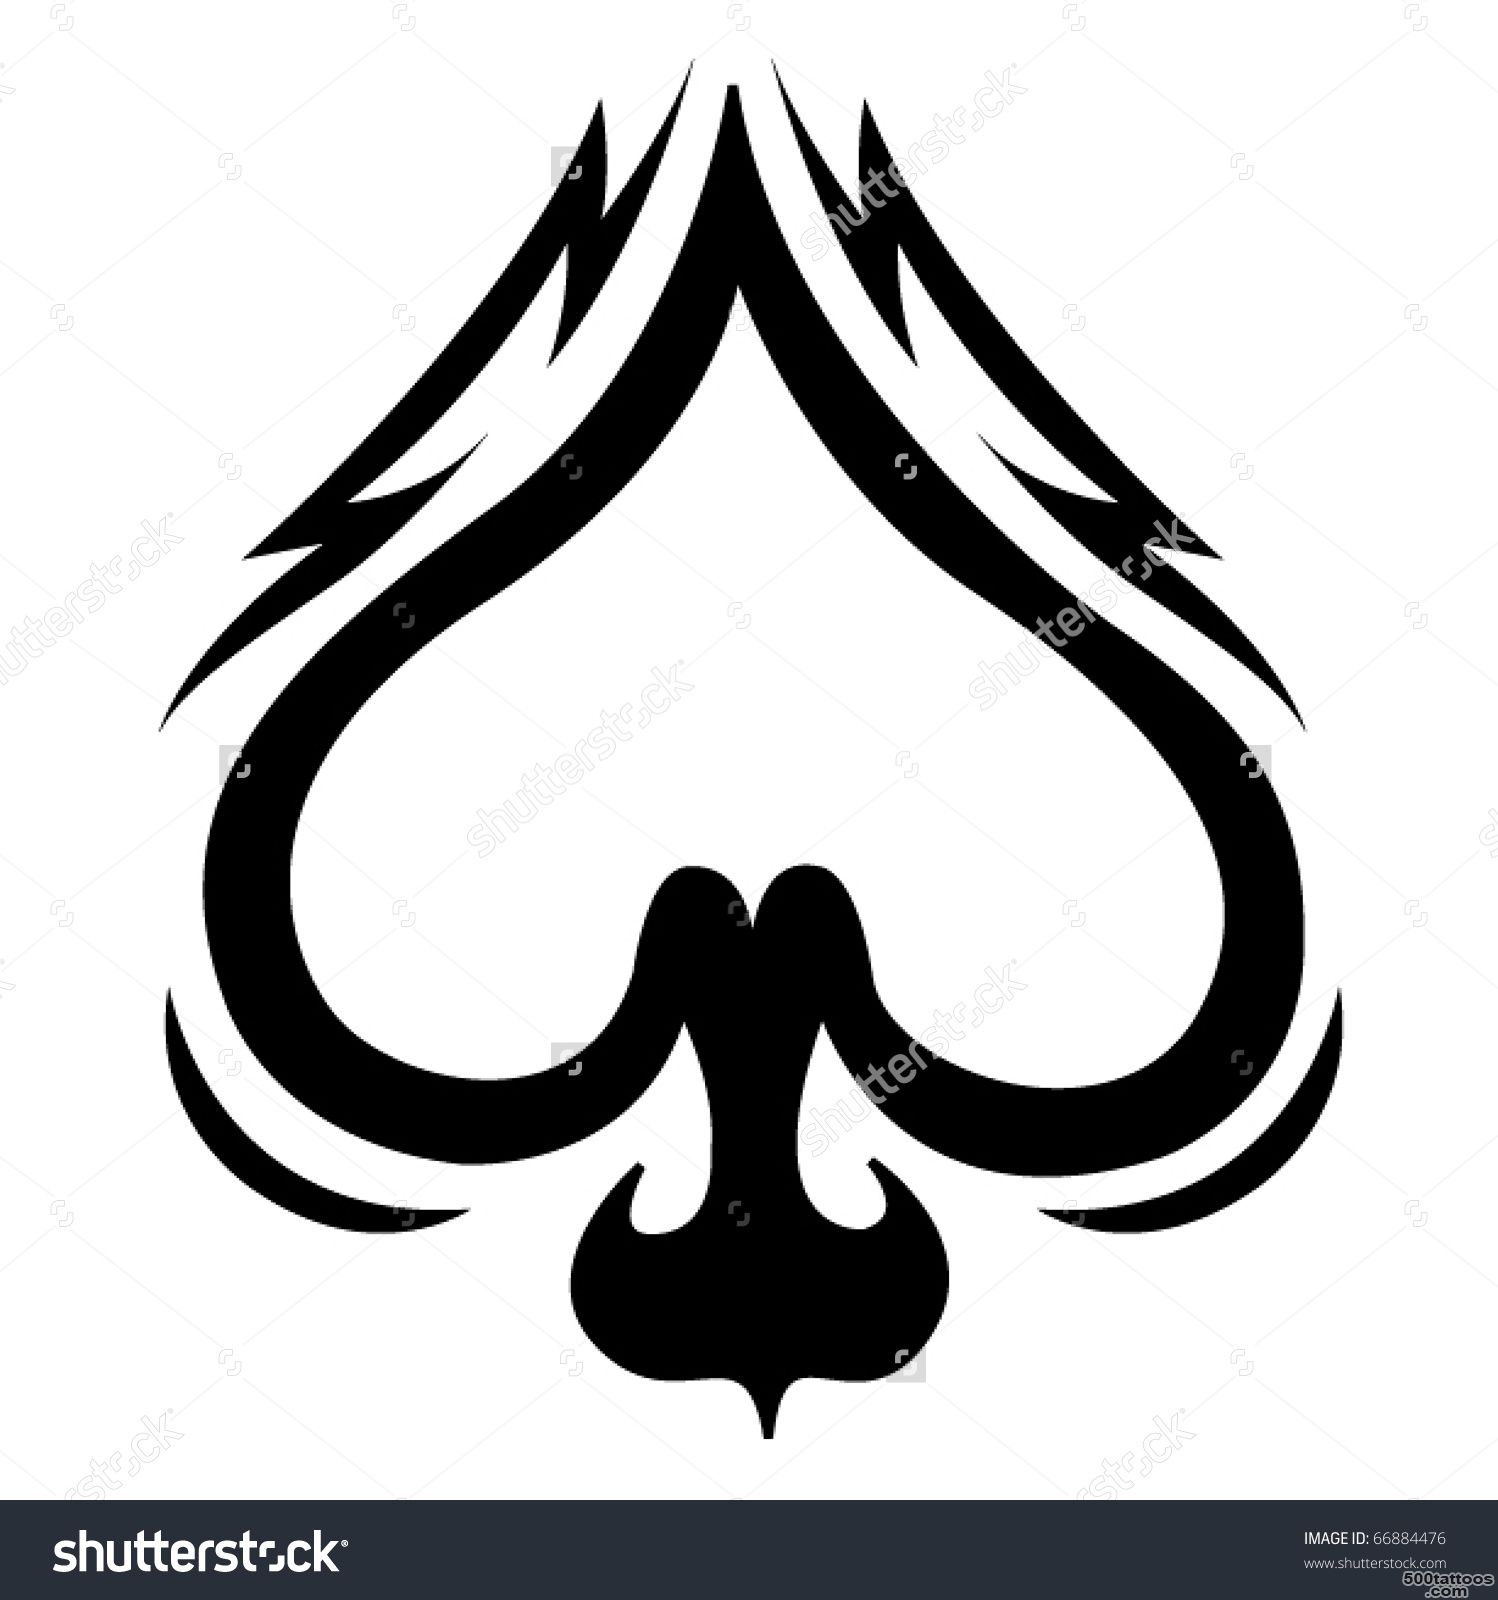 Spade tattoo Stock Photos, Images, amp Pictures  Shutterstock_33